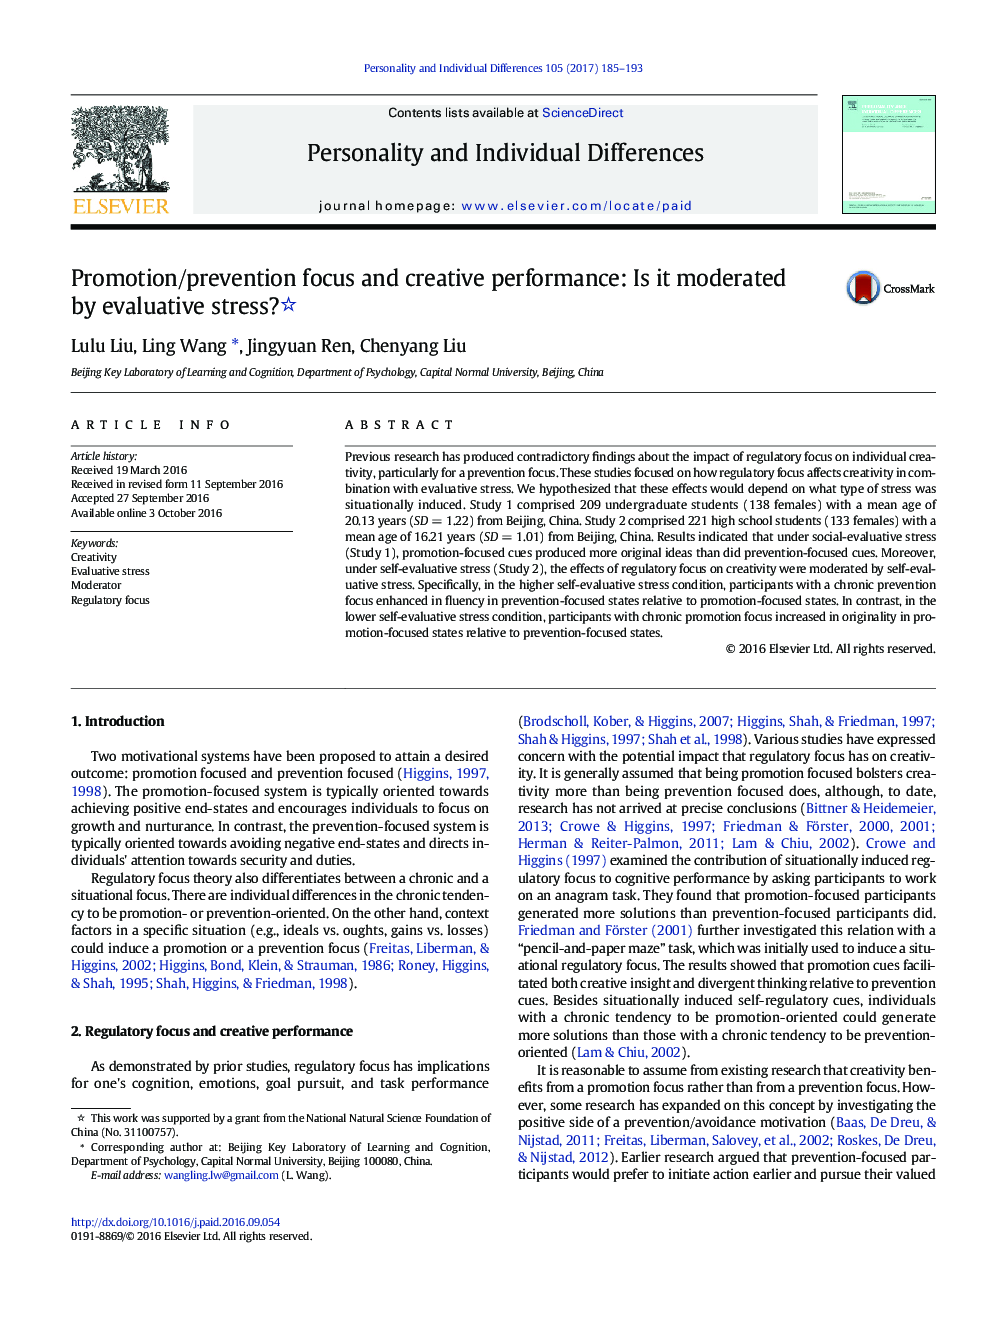 Promotion/prevention focus and creative performance: Is it moderated by evaluative stress?